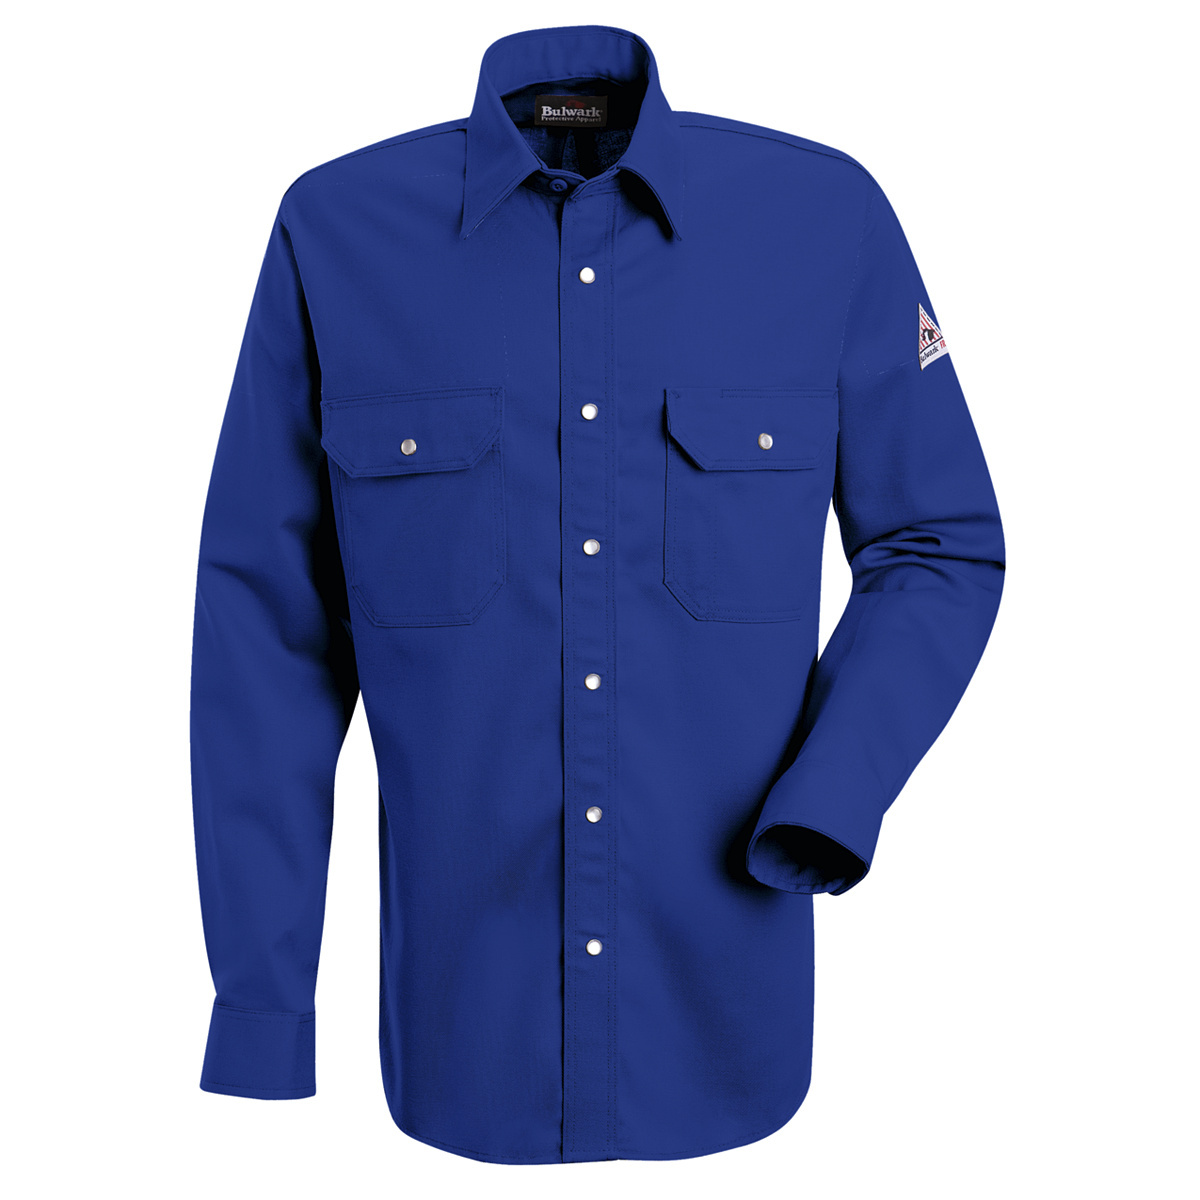 Bulwark® Small| Regular Royal Blue EXCEL FR® Cotton Flame Resistant Uniform Shirt With Snap Front Closure